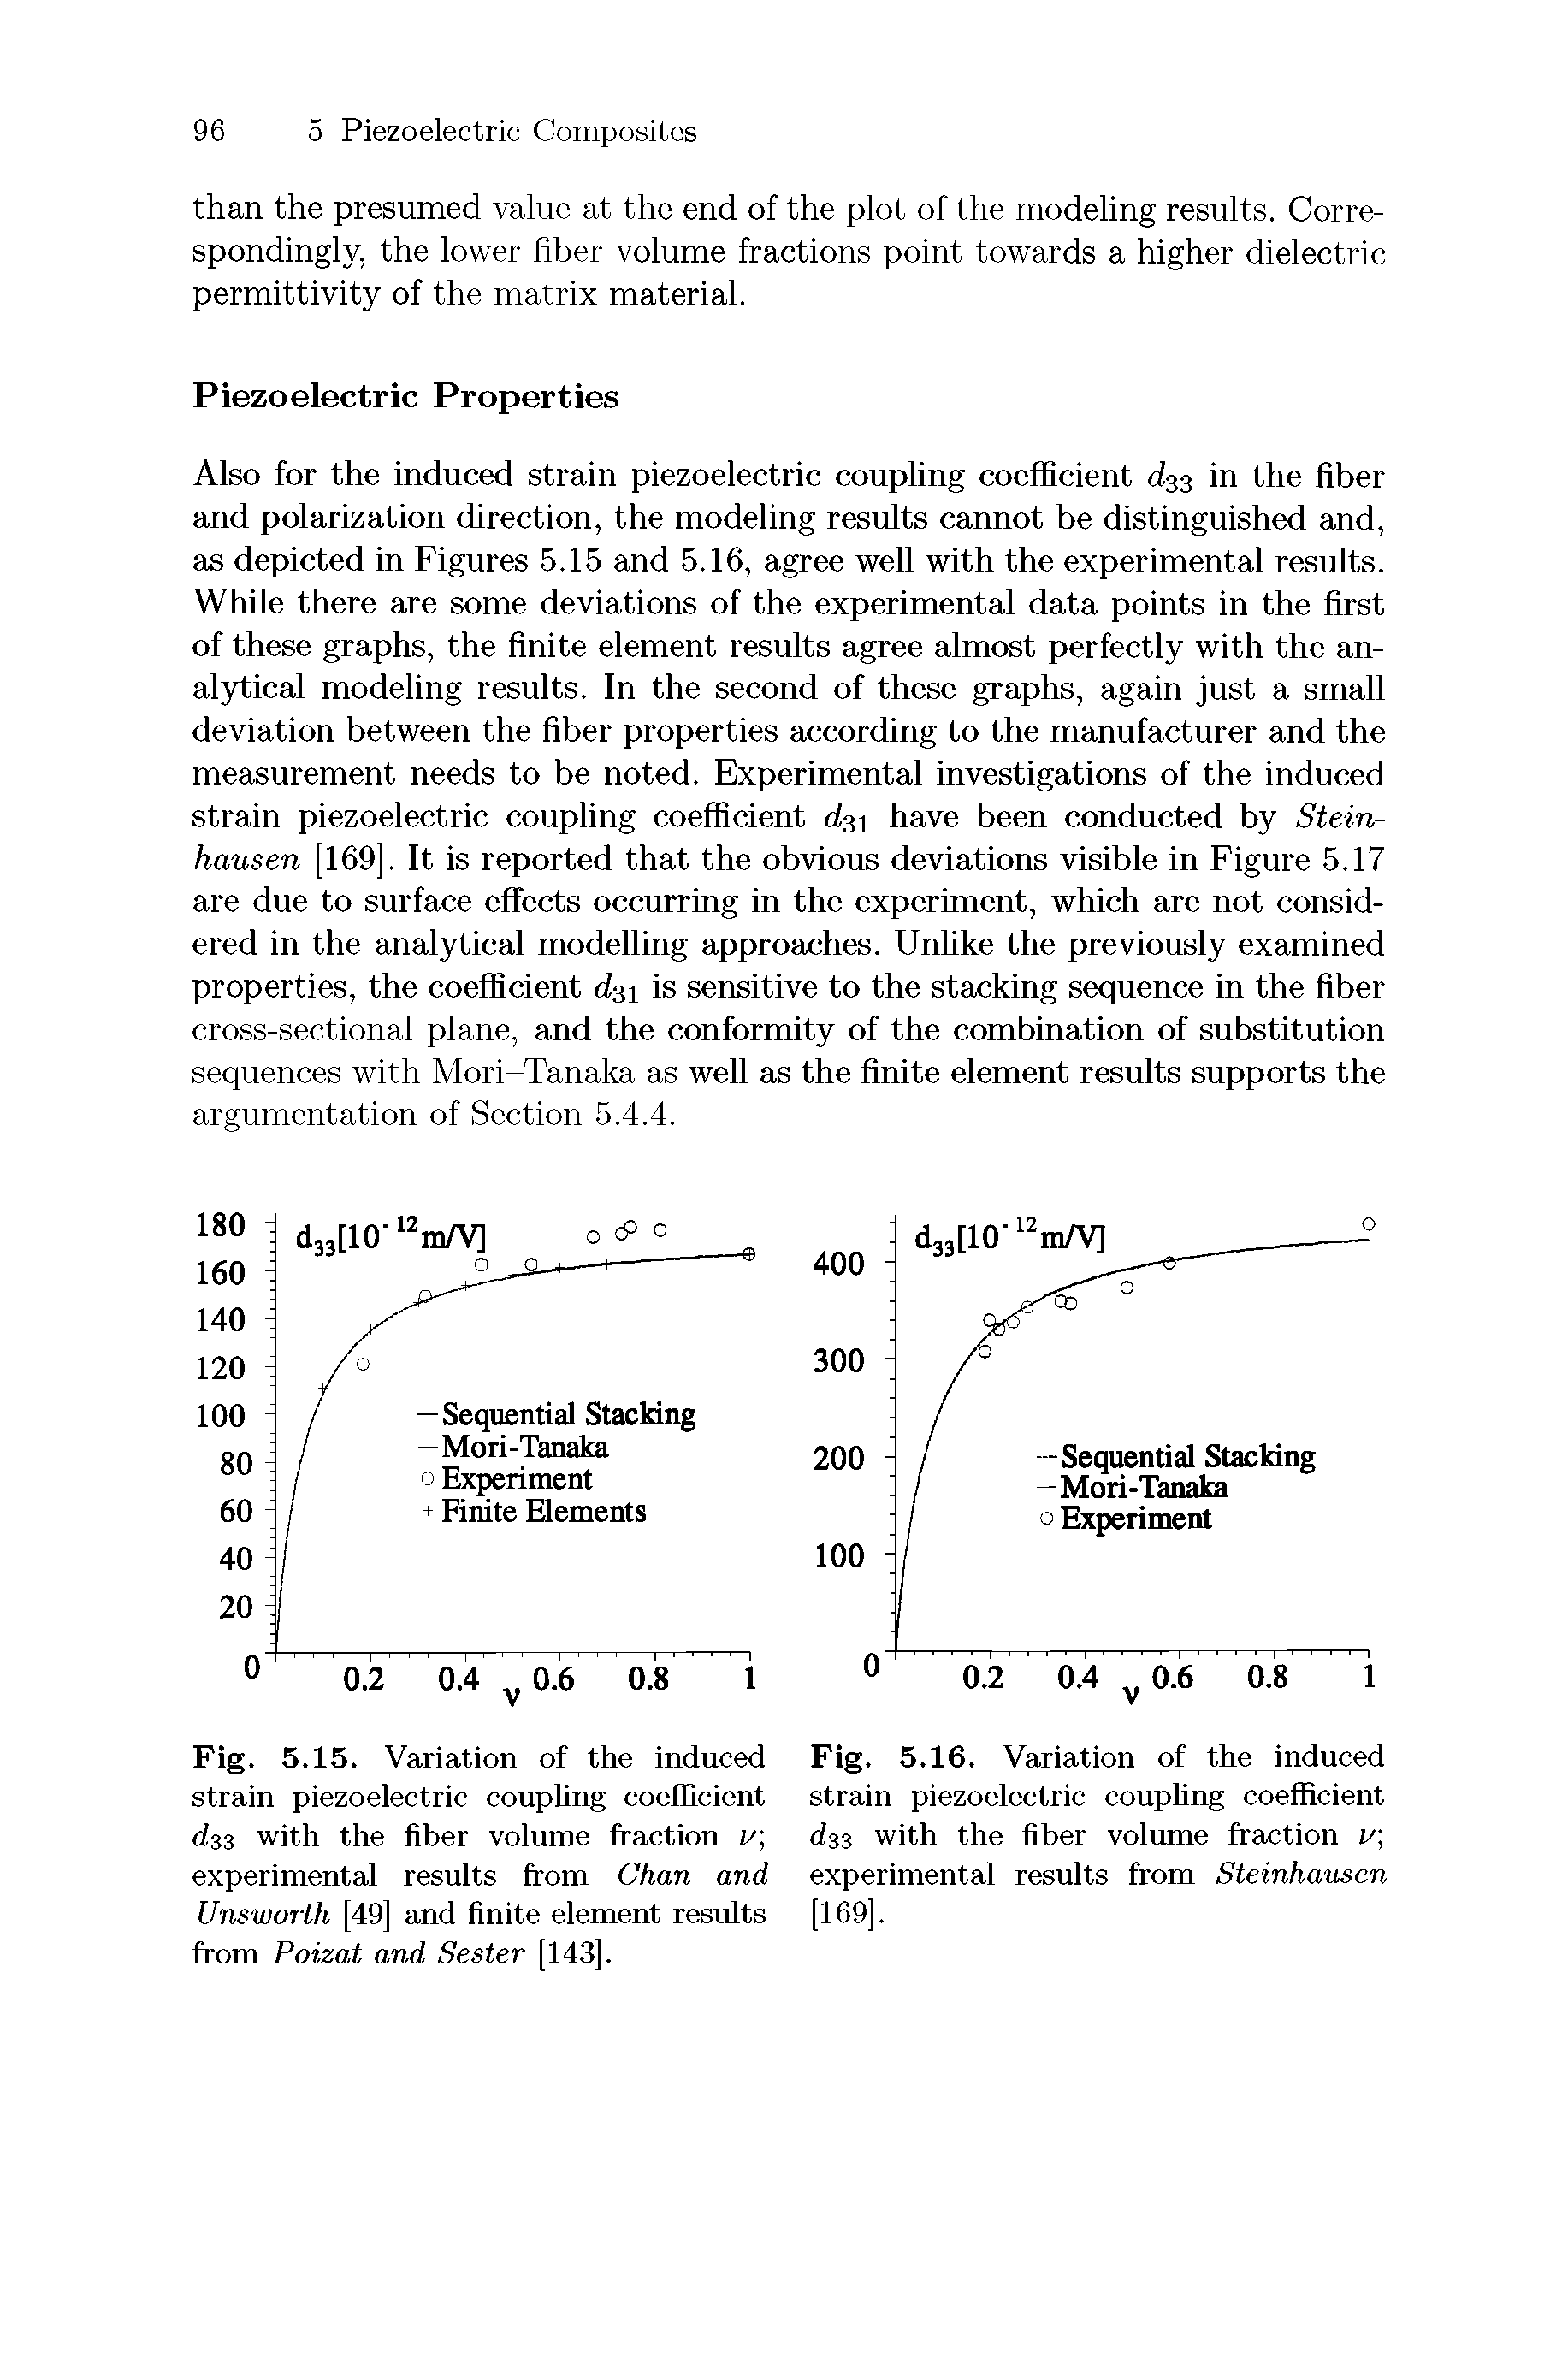 Fig. 5.15. Variation of the induced strain piezoelectric coupling coefficient dss with the fiber volume fraction n experimental results from Chan and Unsworth [49] and finite element results from Poizat and Sester [143].